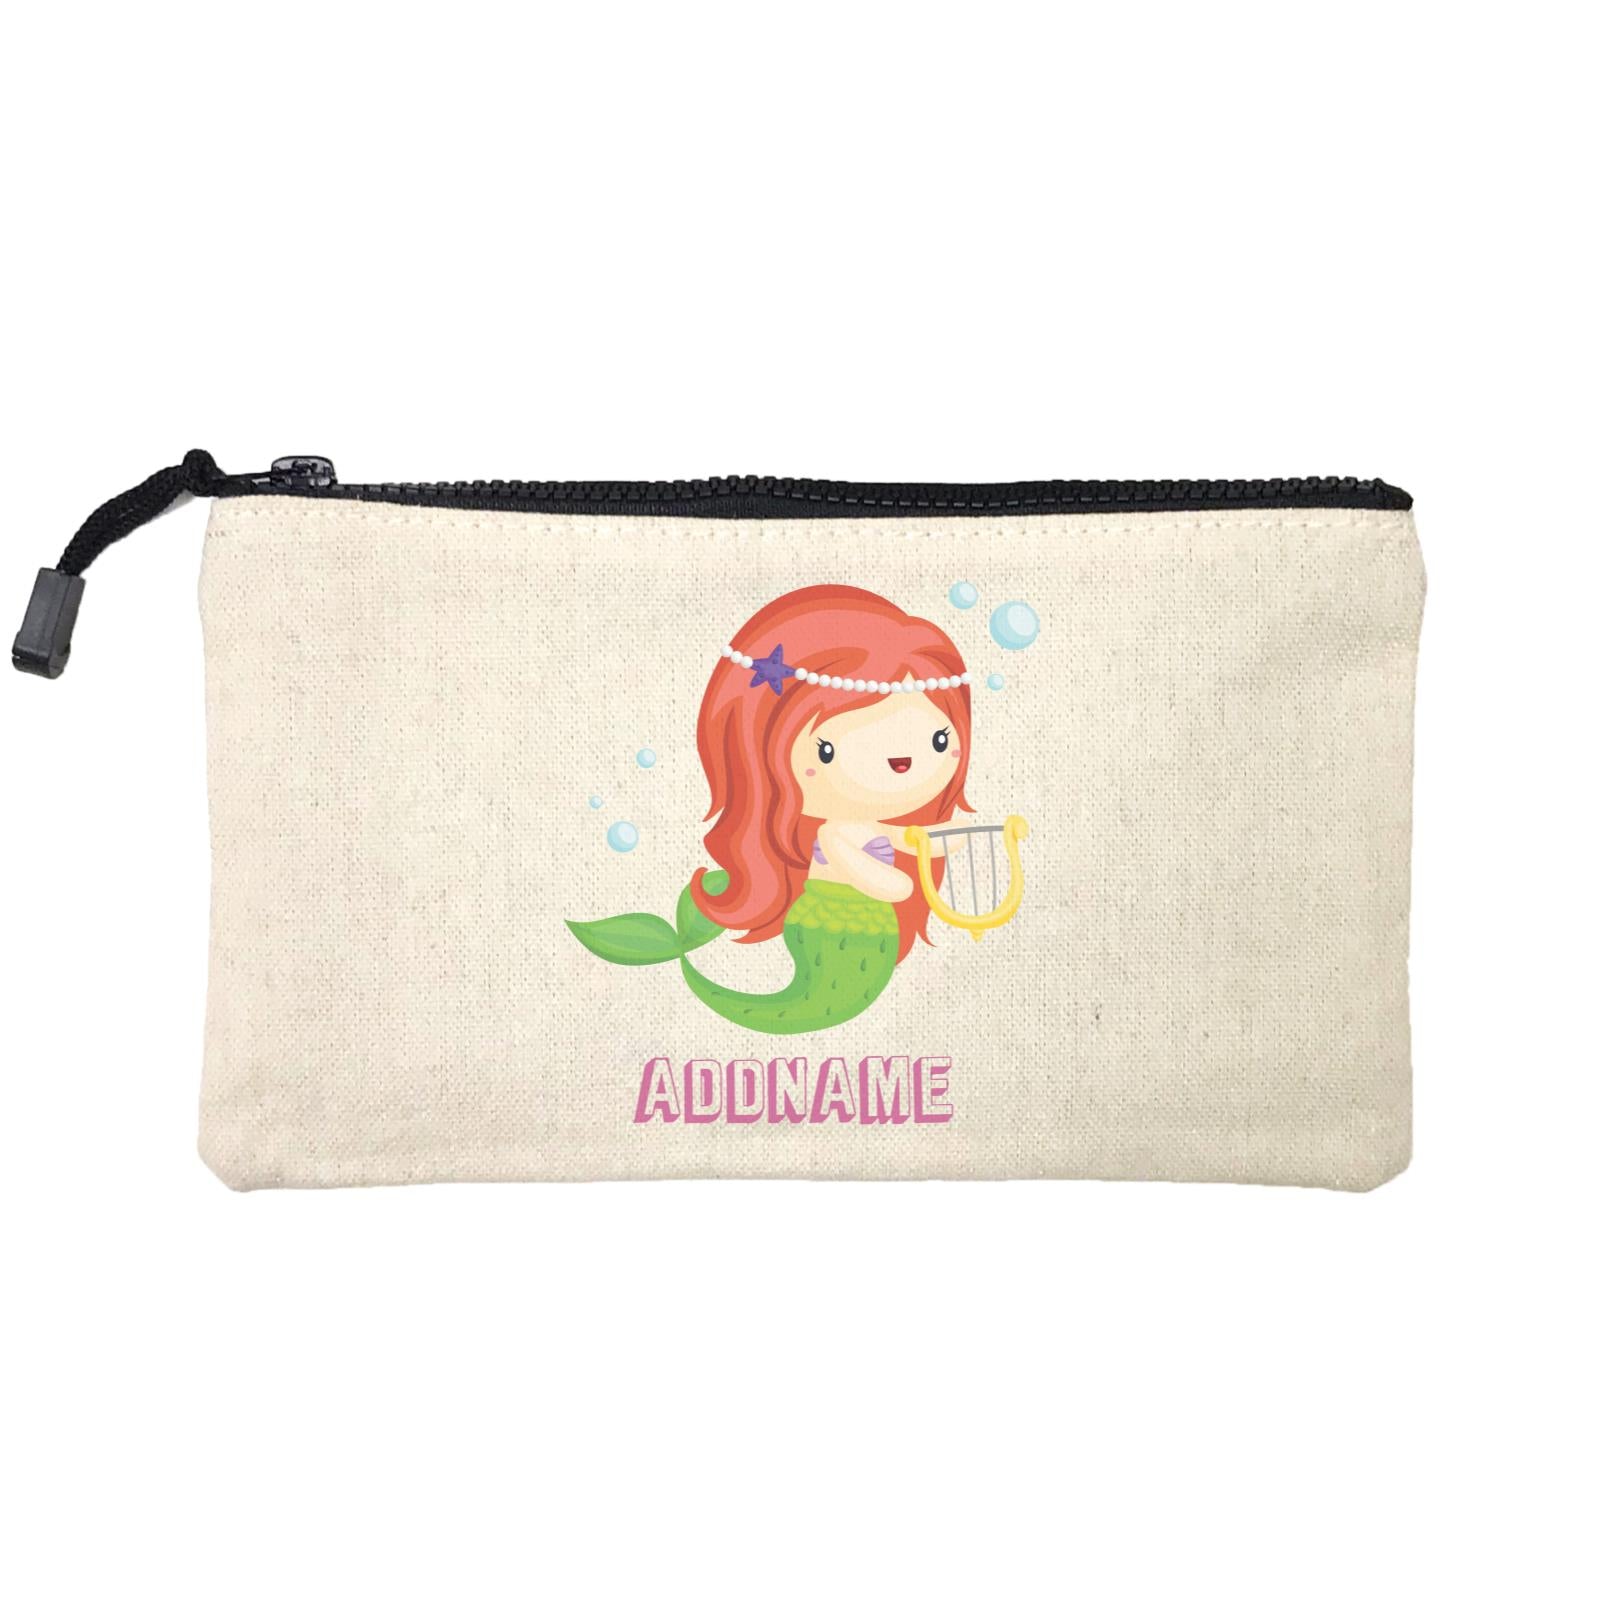 Birthday Mermaid Red Long Hair Mermaid Playing Harp Addname Mini Accessories Stationery Pouch